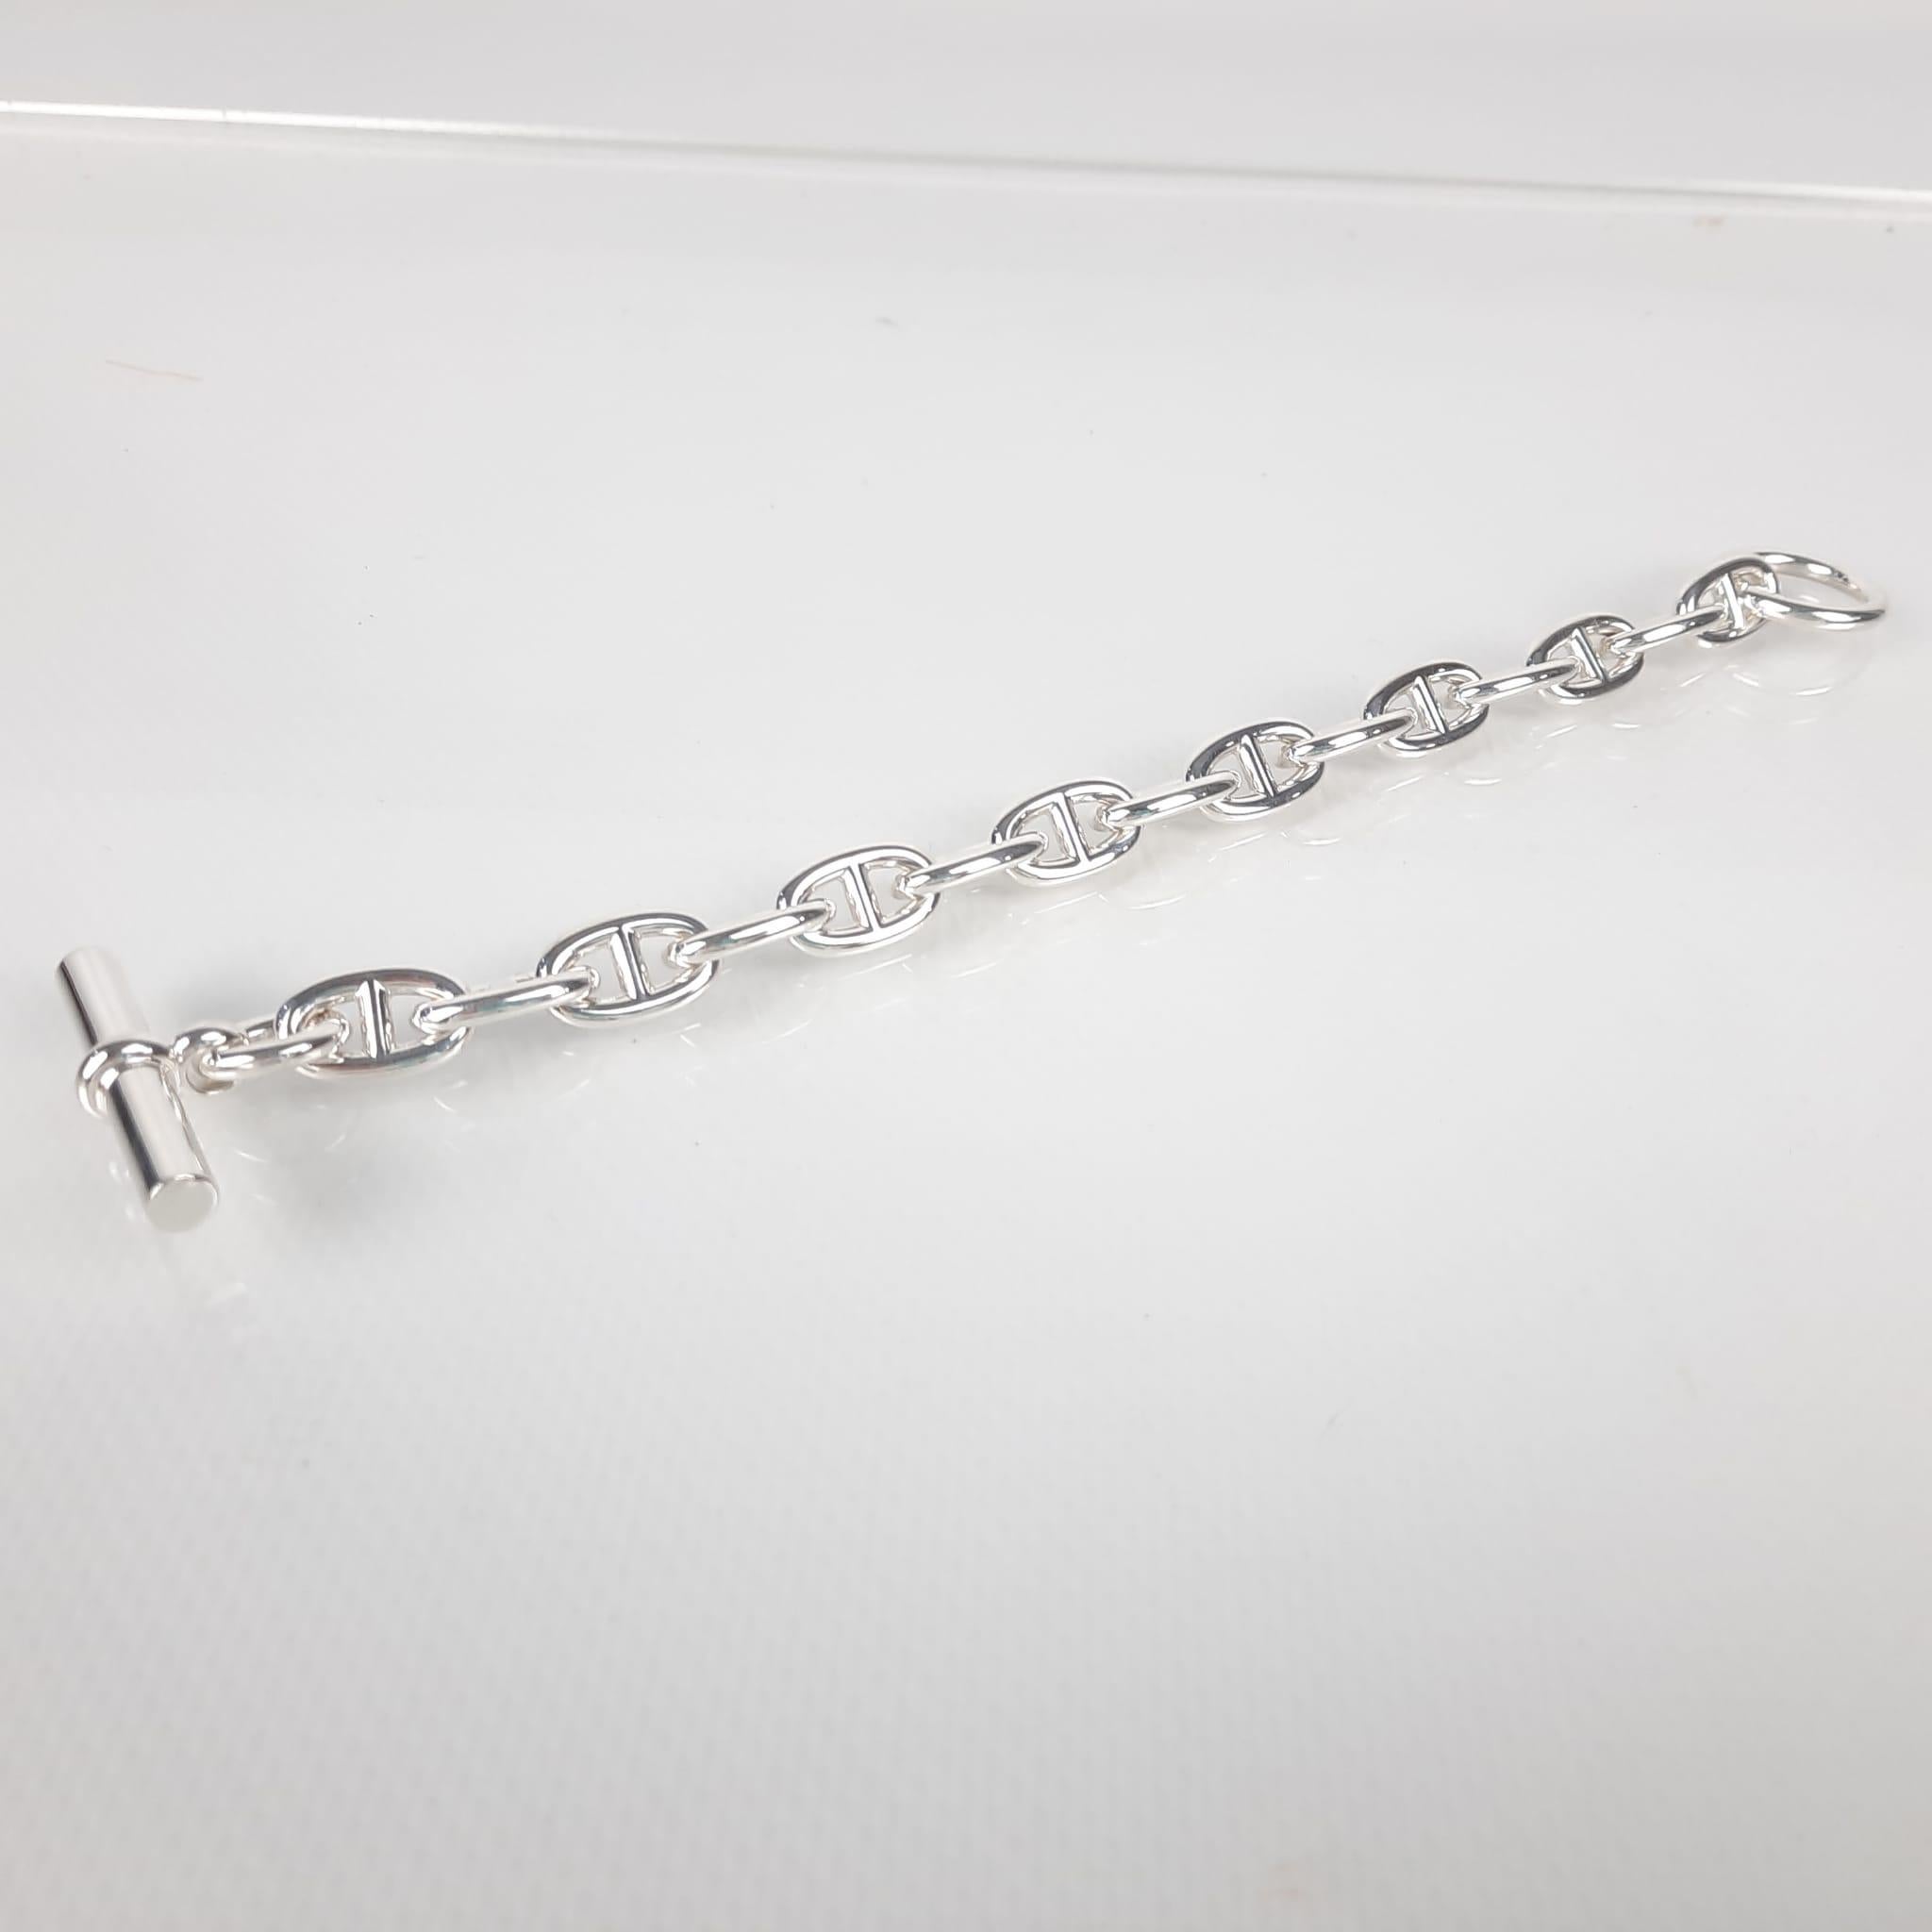 Size 15
Bracelet in sterling silver
Made in France/Germany
Silver 925/1000
Interior circumference: 13.18 cm
Chaine d'ancre link size: 1.41 x 0.87 cm